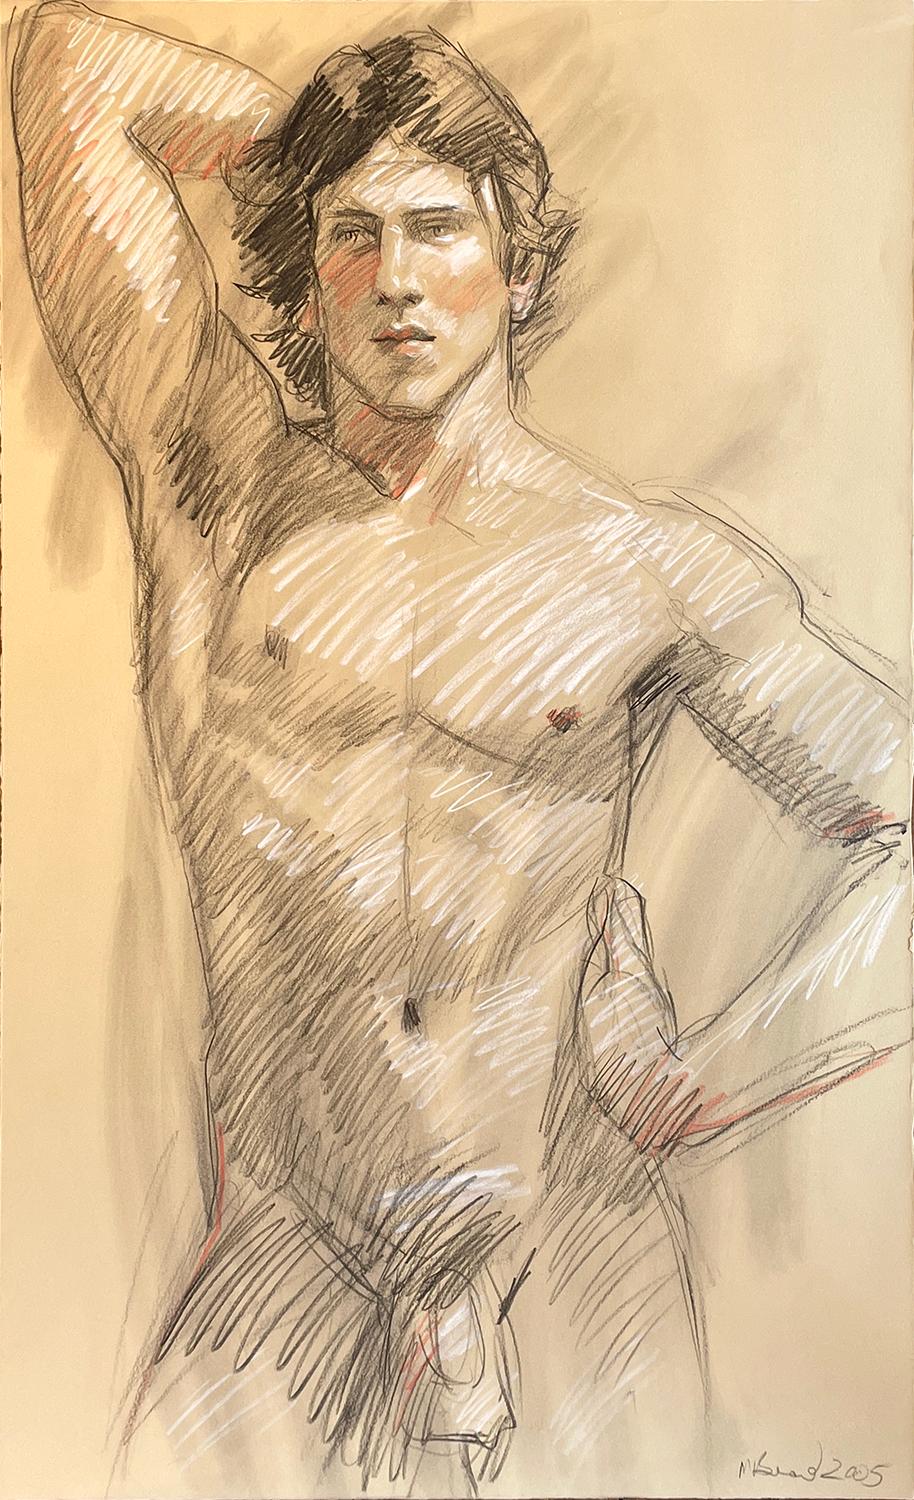 Academic life drawing of male nude with charcoal and graphite by Mark Beard, "MB 085A"
graphite, Conte crayon and charcoal on Arches paper
30 x 18.5 inches unframed
Signed, lower right

Contemporary figurative life study drawing of male nude in